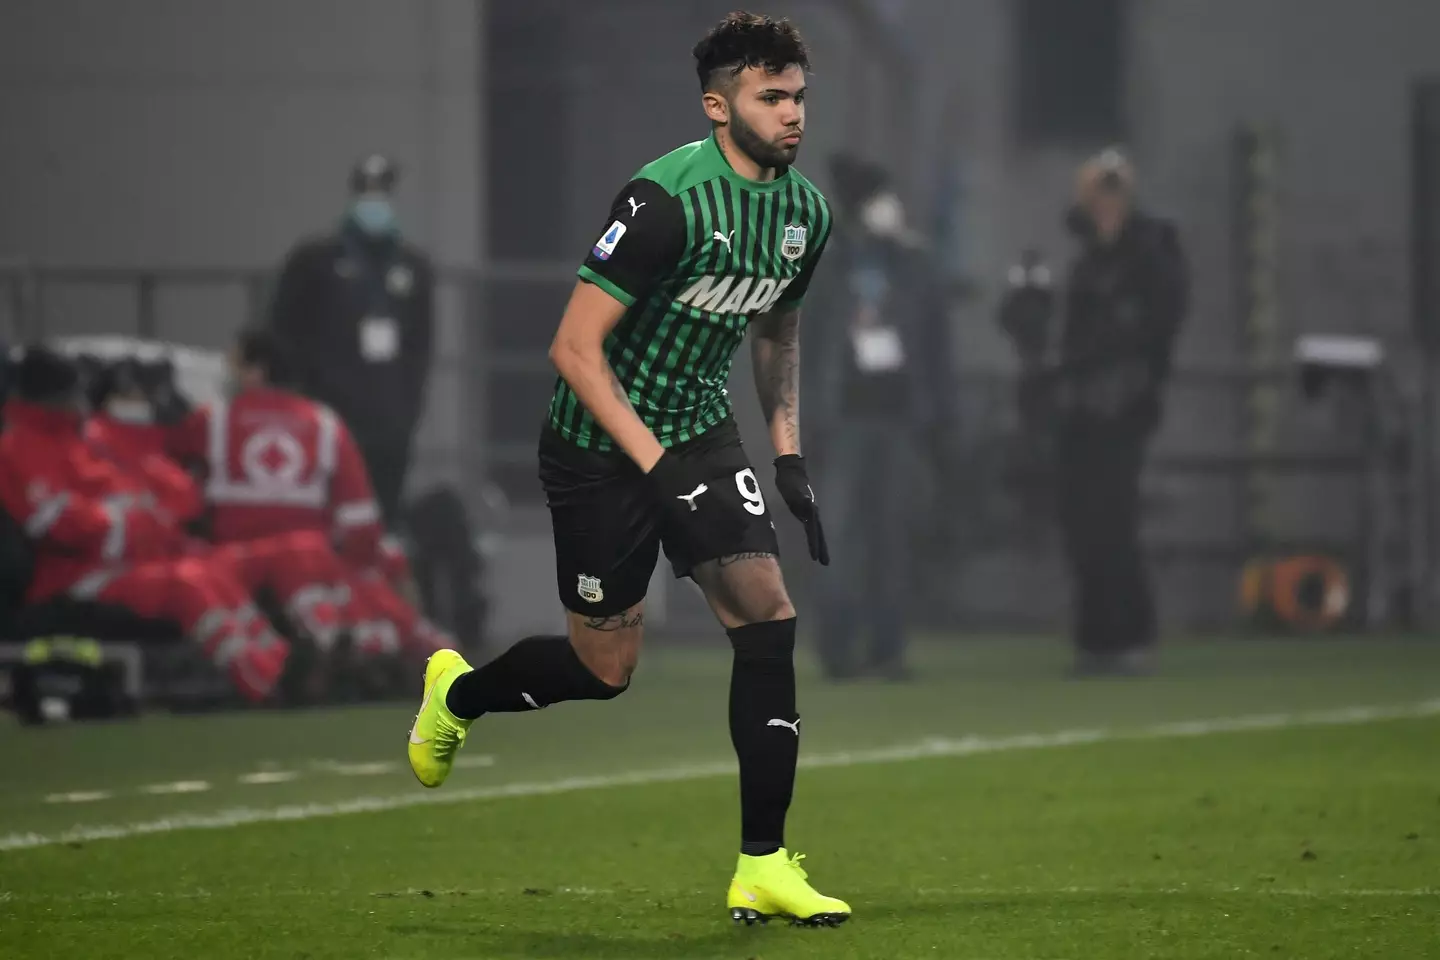 Schiappacasse signed for Serie A club Sassuolo in 2020 (Image: PA)